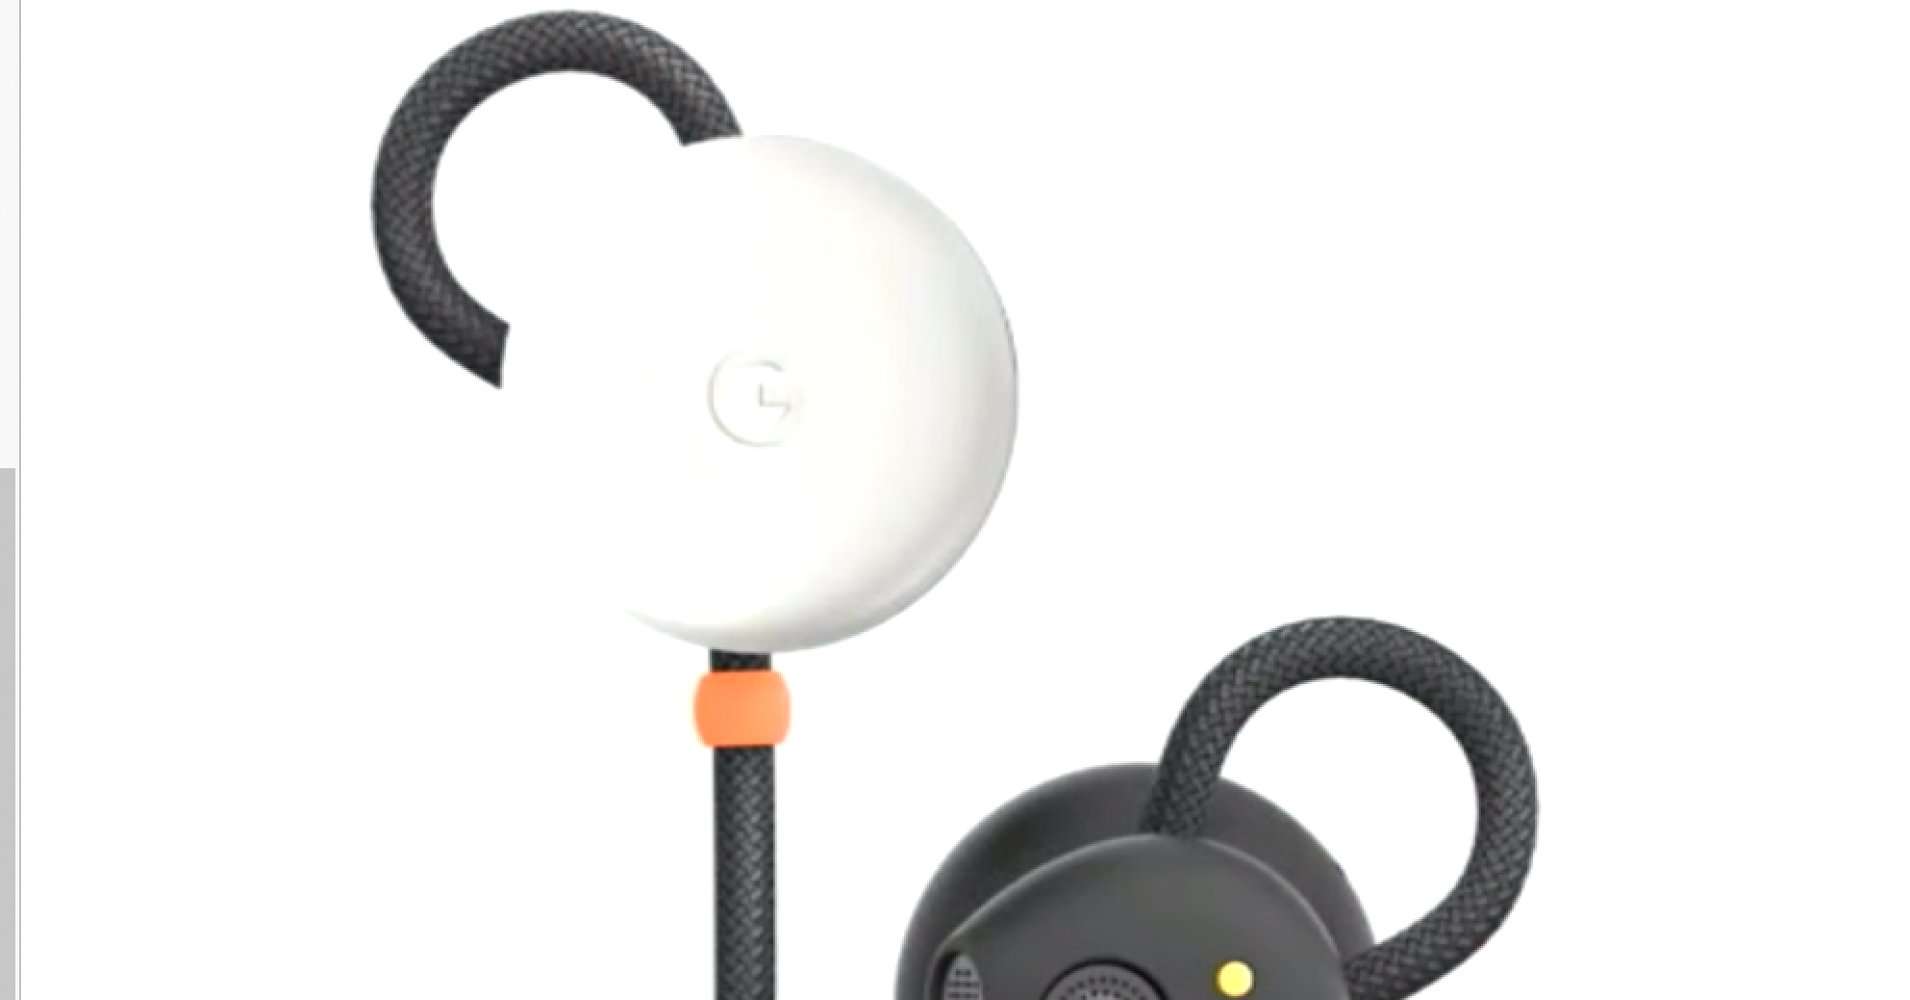 image for Google shows off wireless headphones that it says can translate languages on the fly